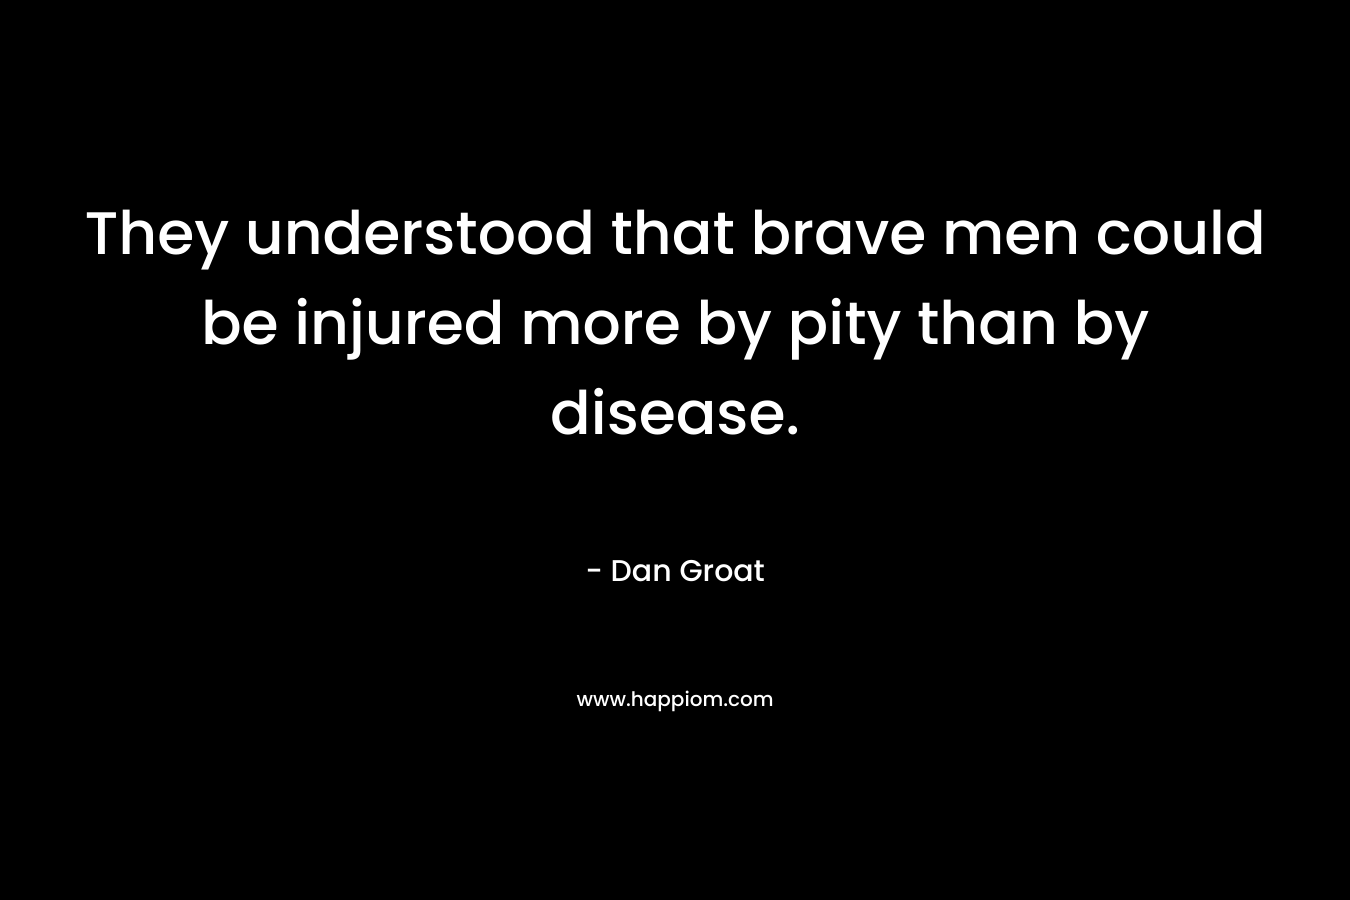 They understood that brave men could be injured more by pity than by disease. – Dan Groat